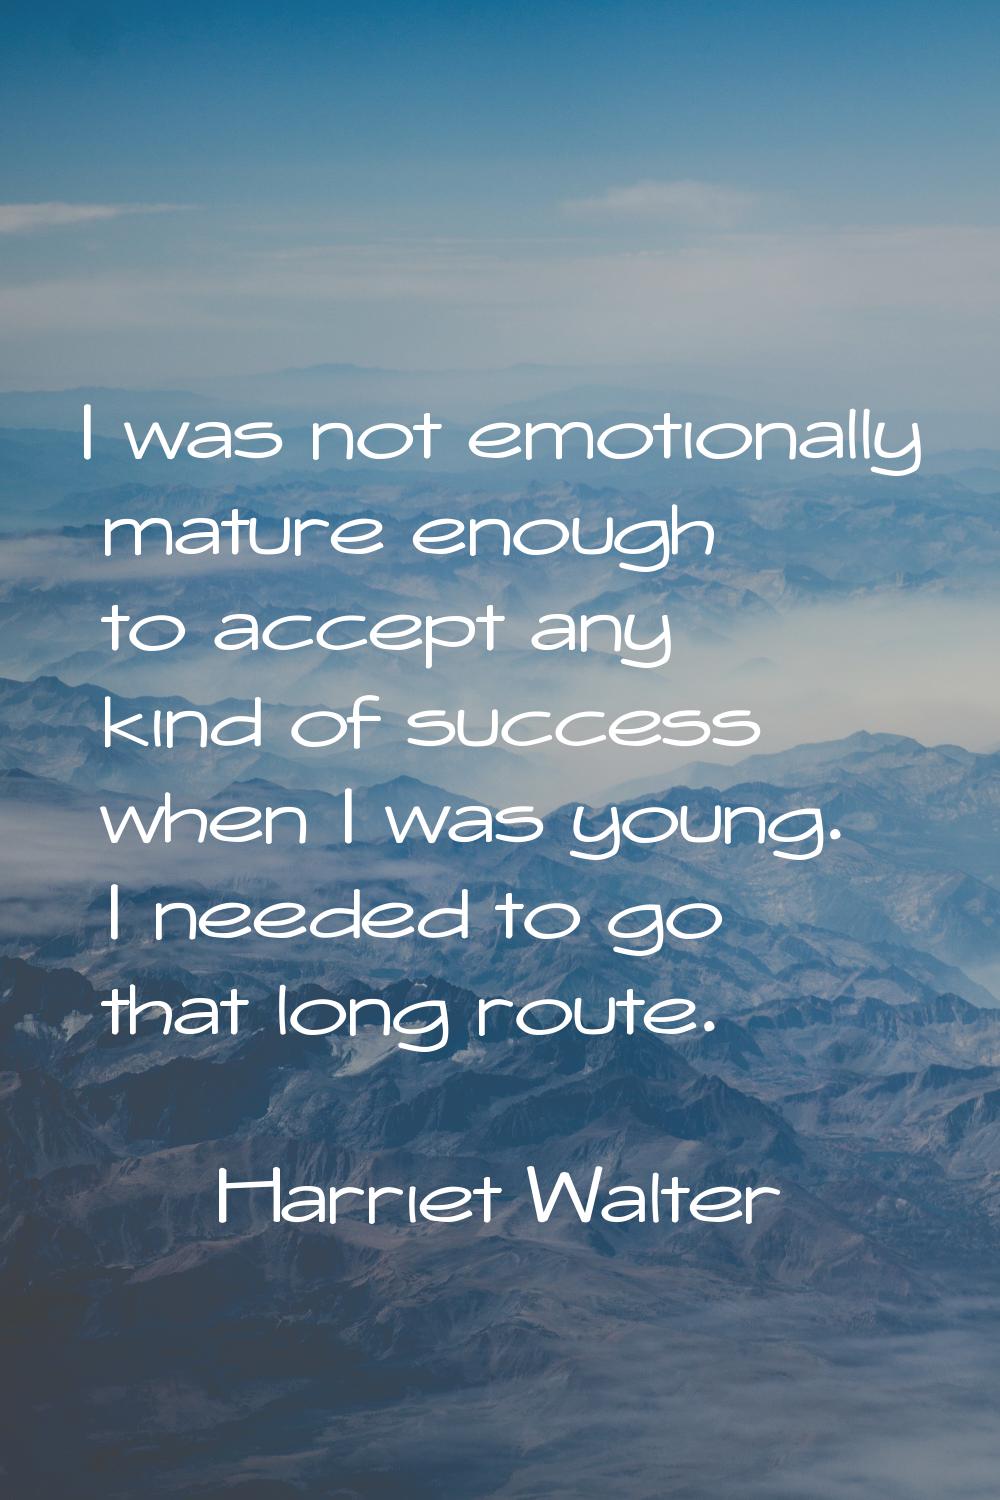 I was not emotionally mature enough to accept any kind of success when I was young. I needed to go 